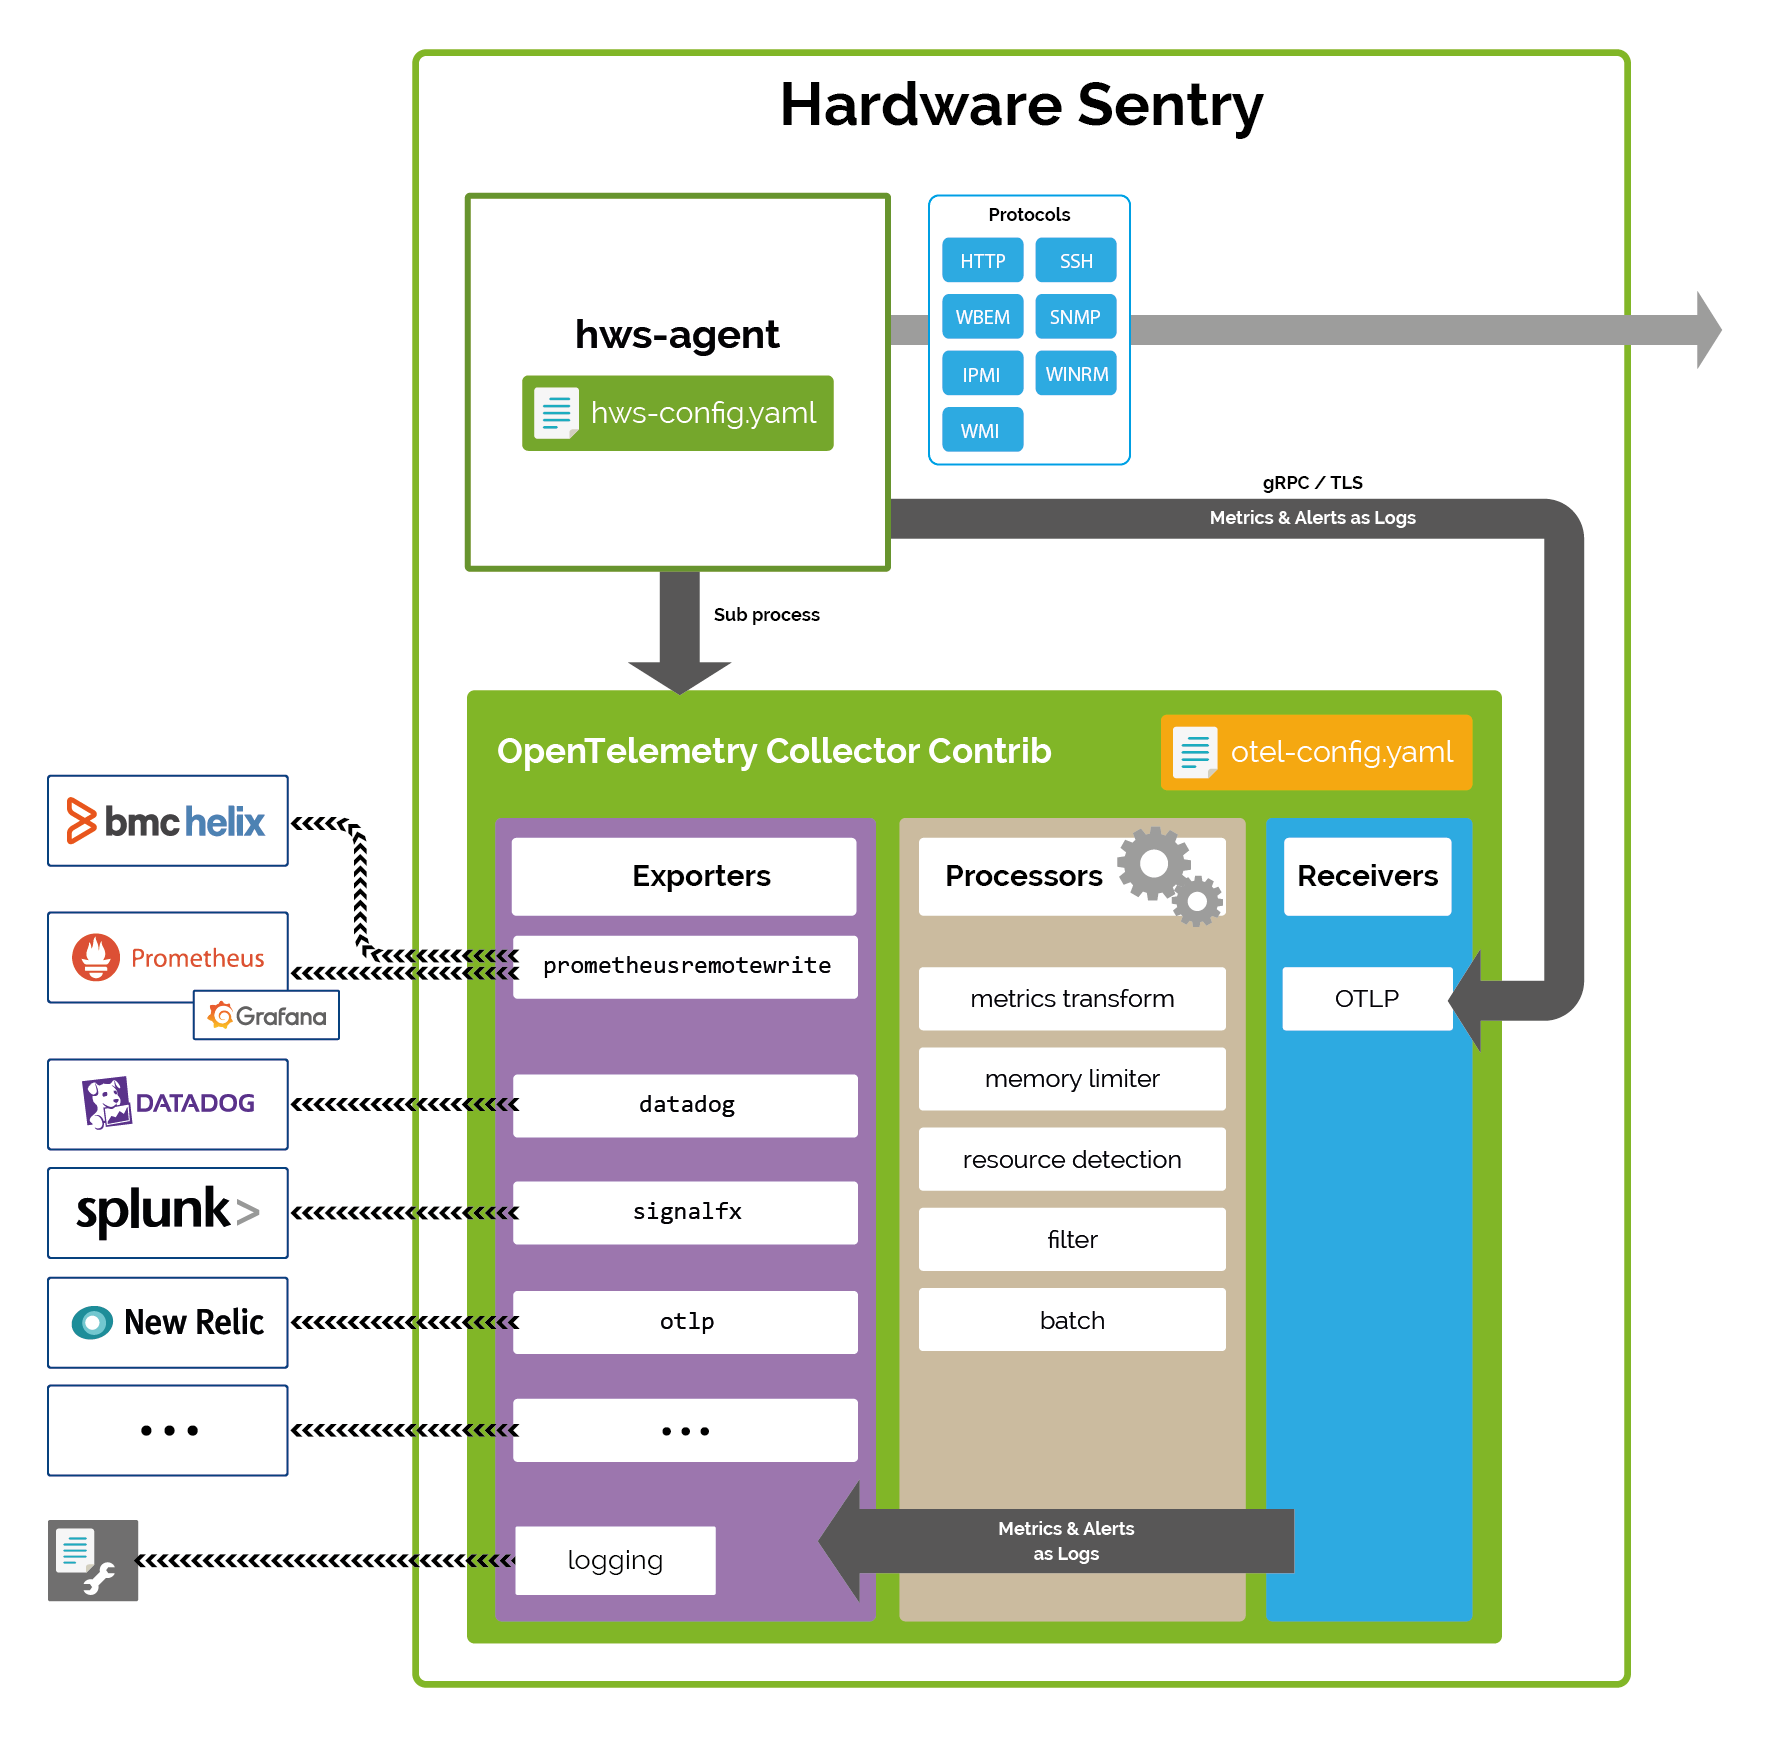 Internal architecture of the Hardware Sentry